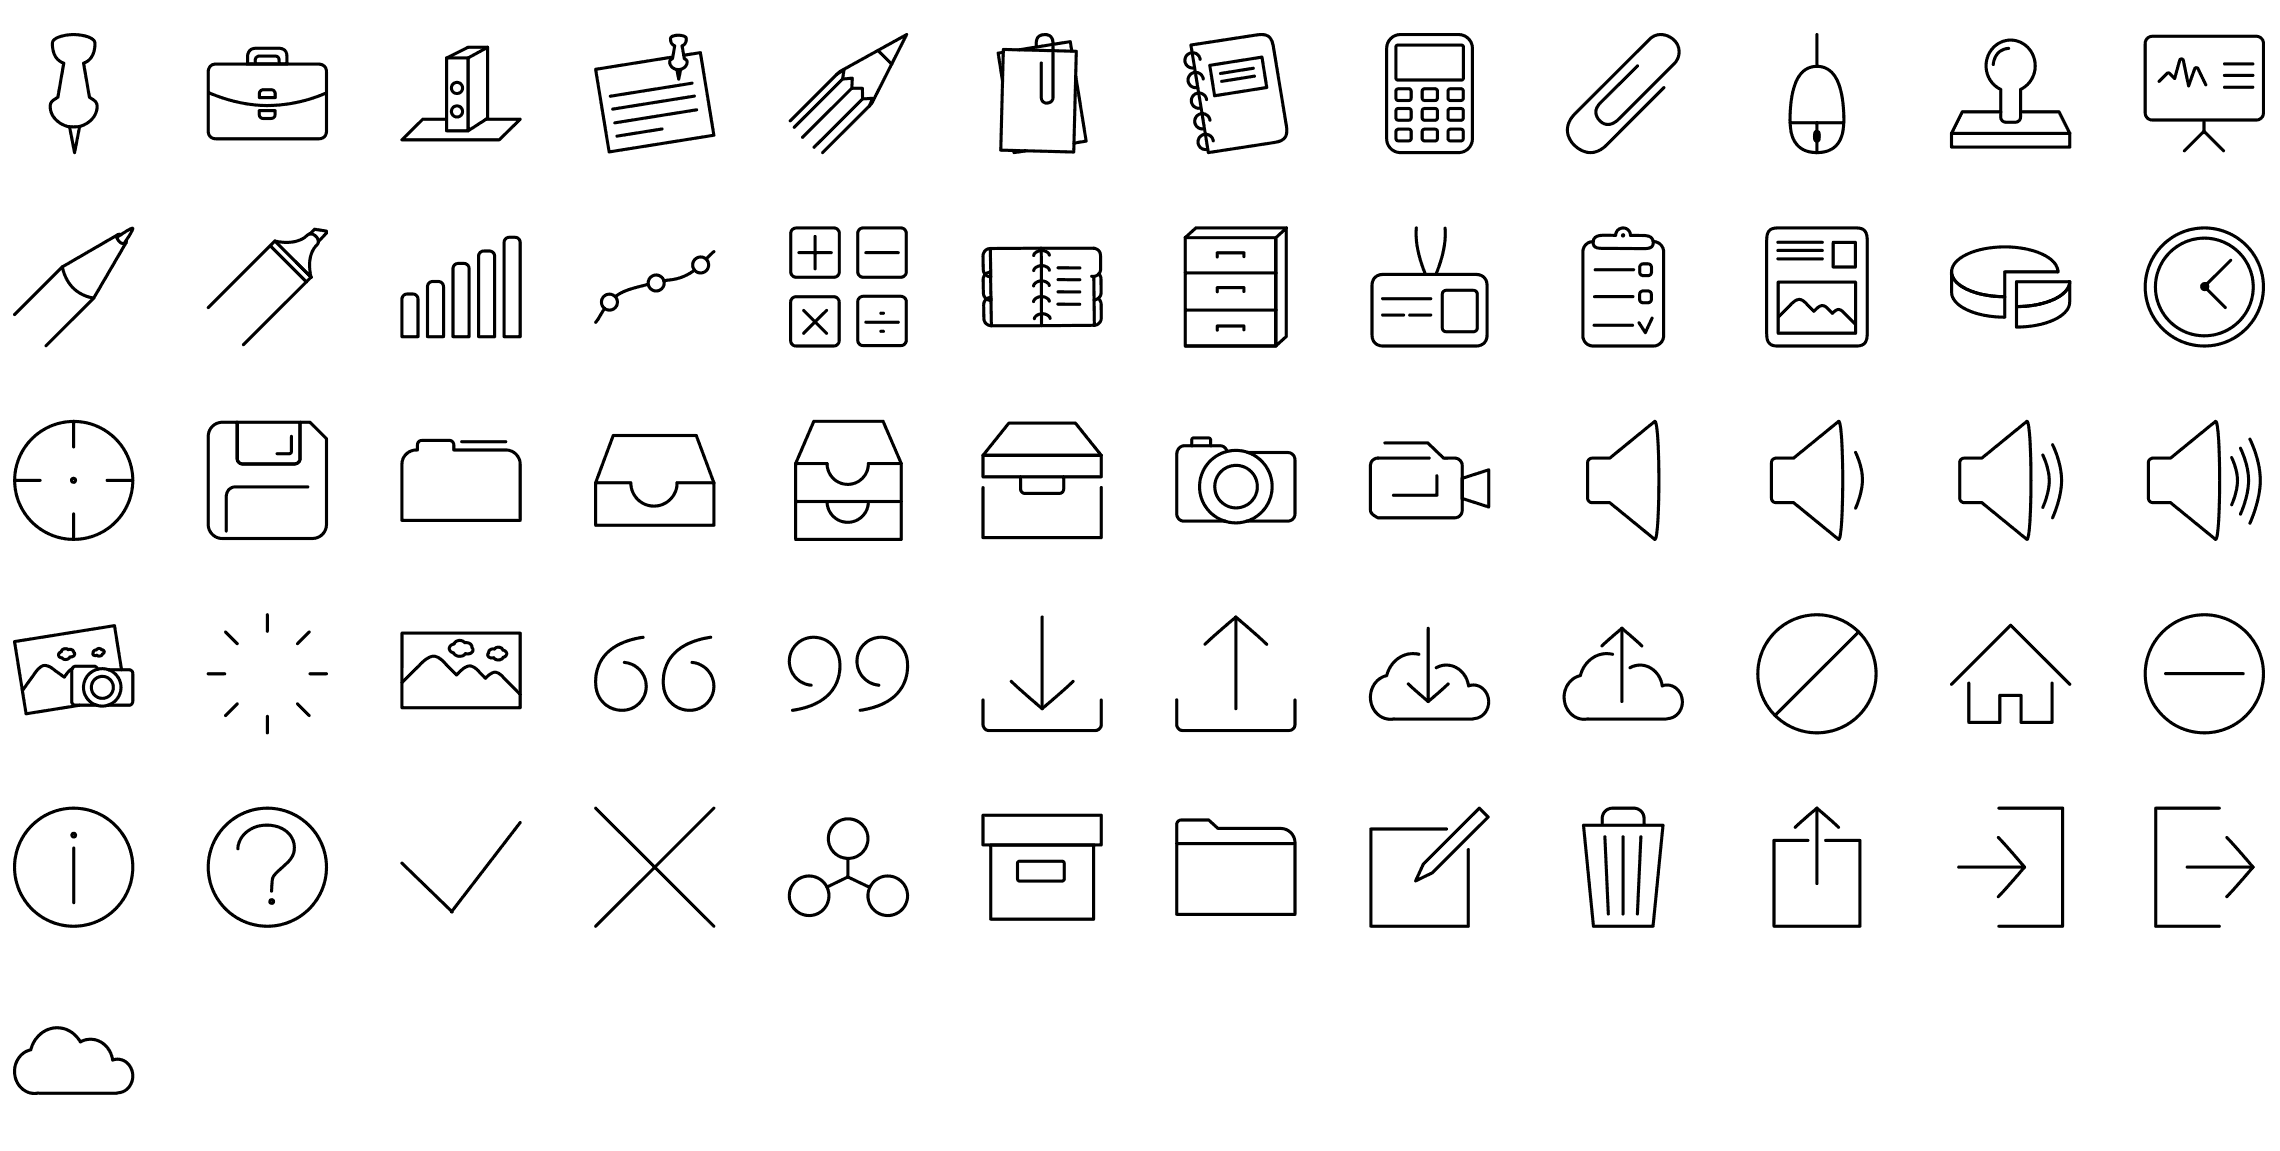 Flat Icons PNG Images, 660000+ Vector Icon Packs